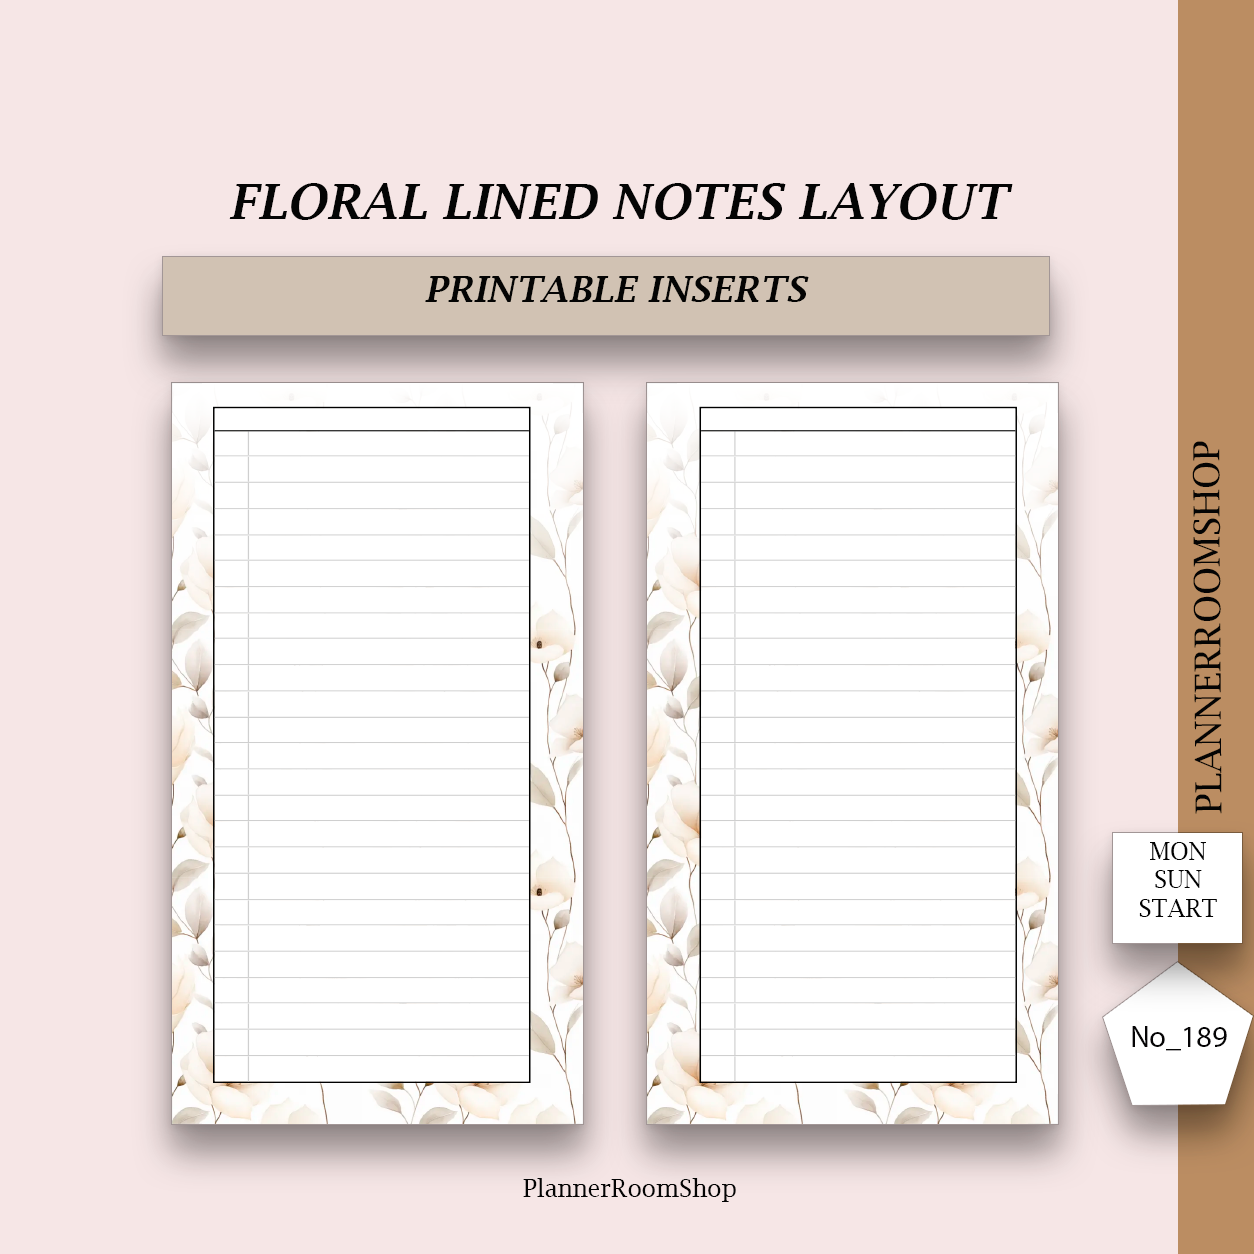 Notes layout | printable inserts - 189